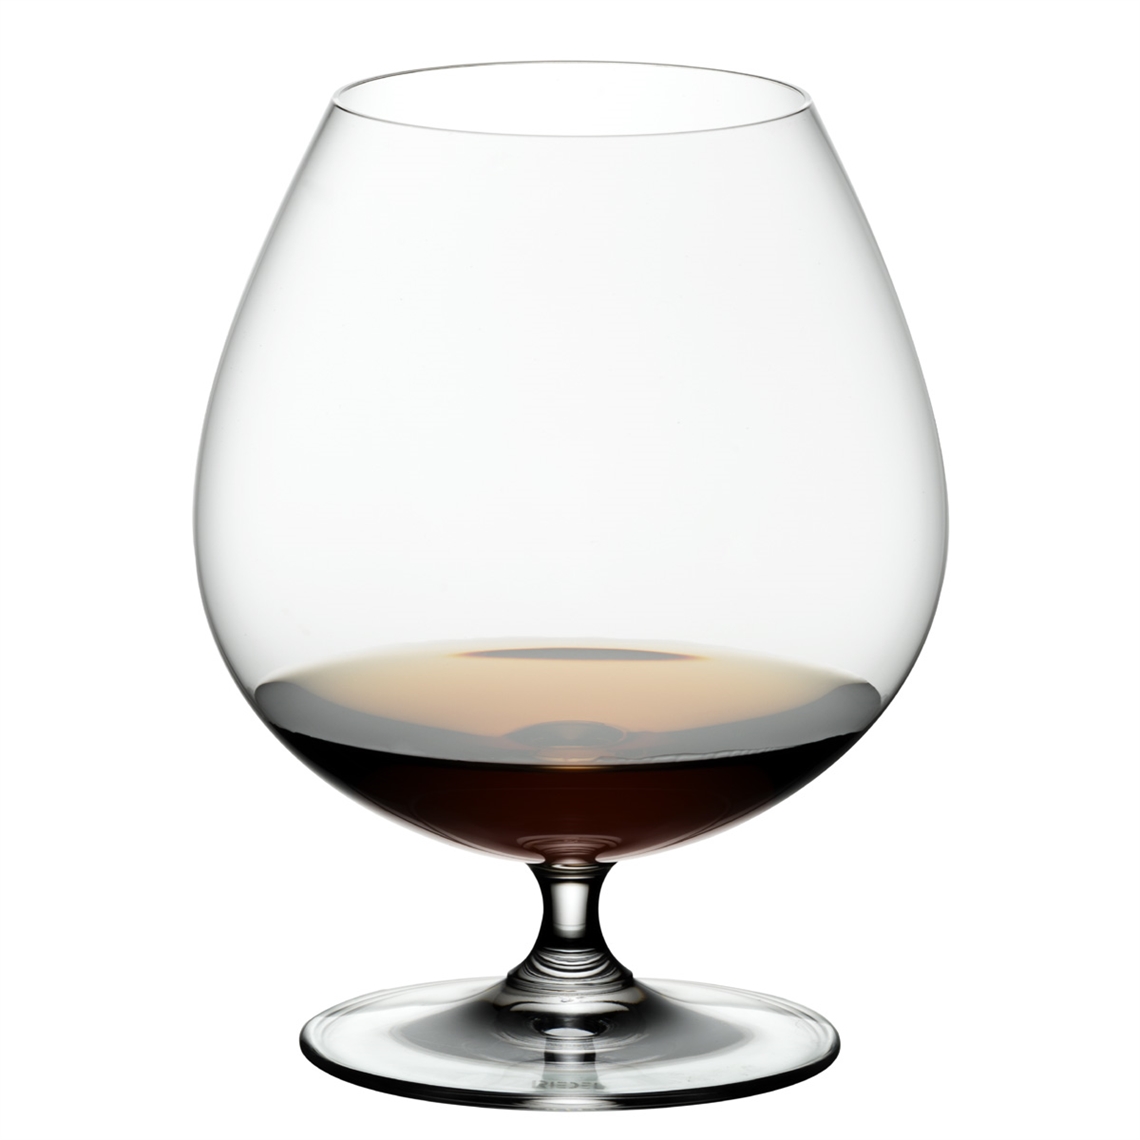 View more stolzle from our Spirit Glasses range